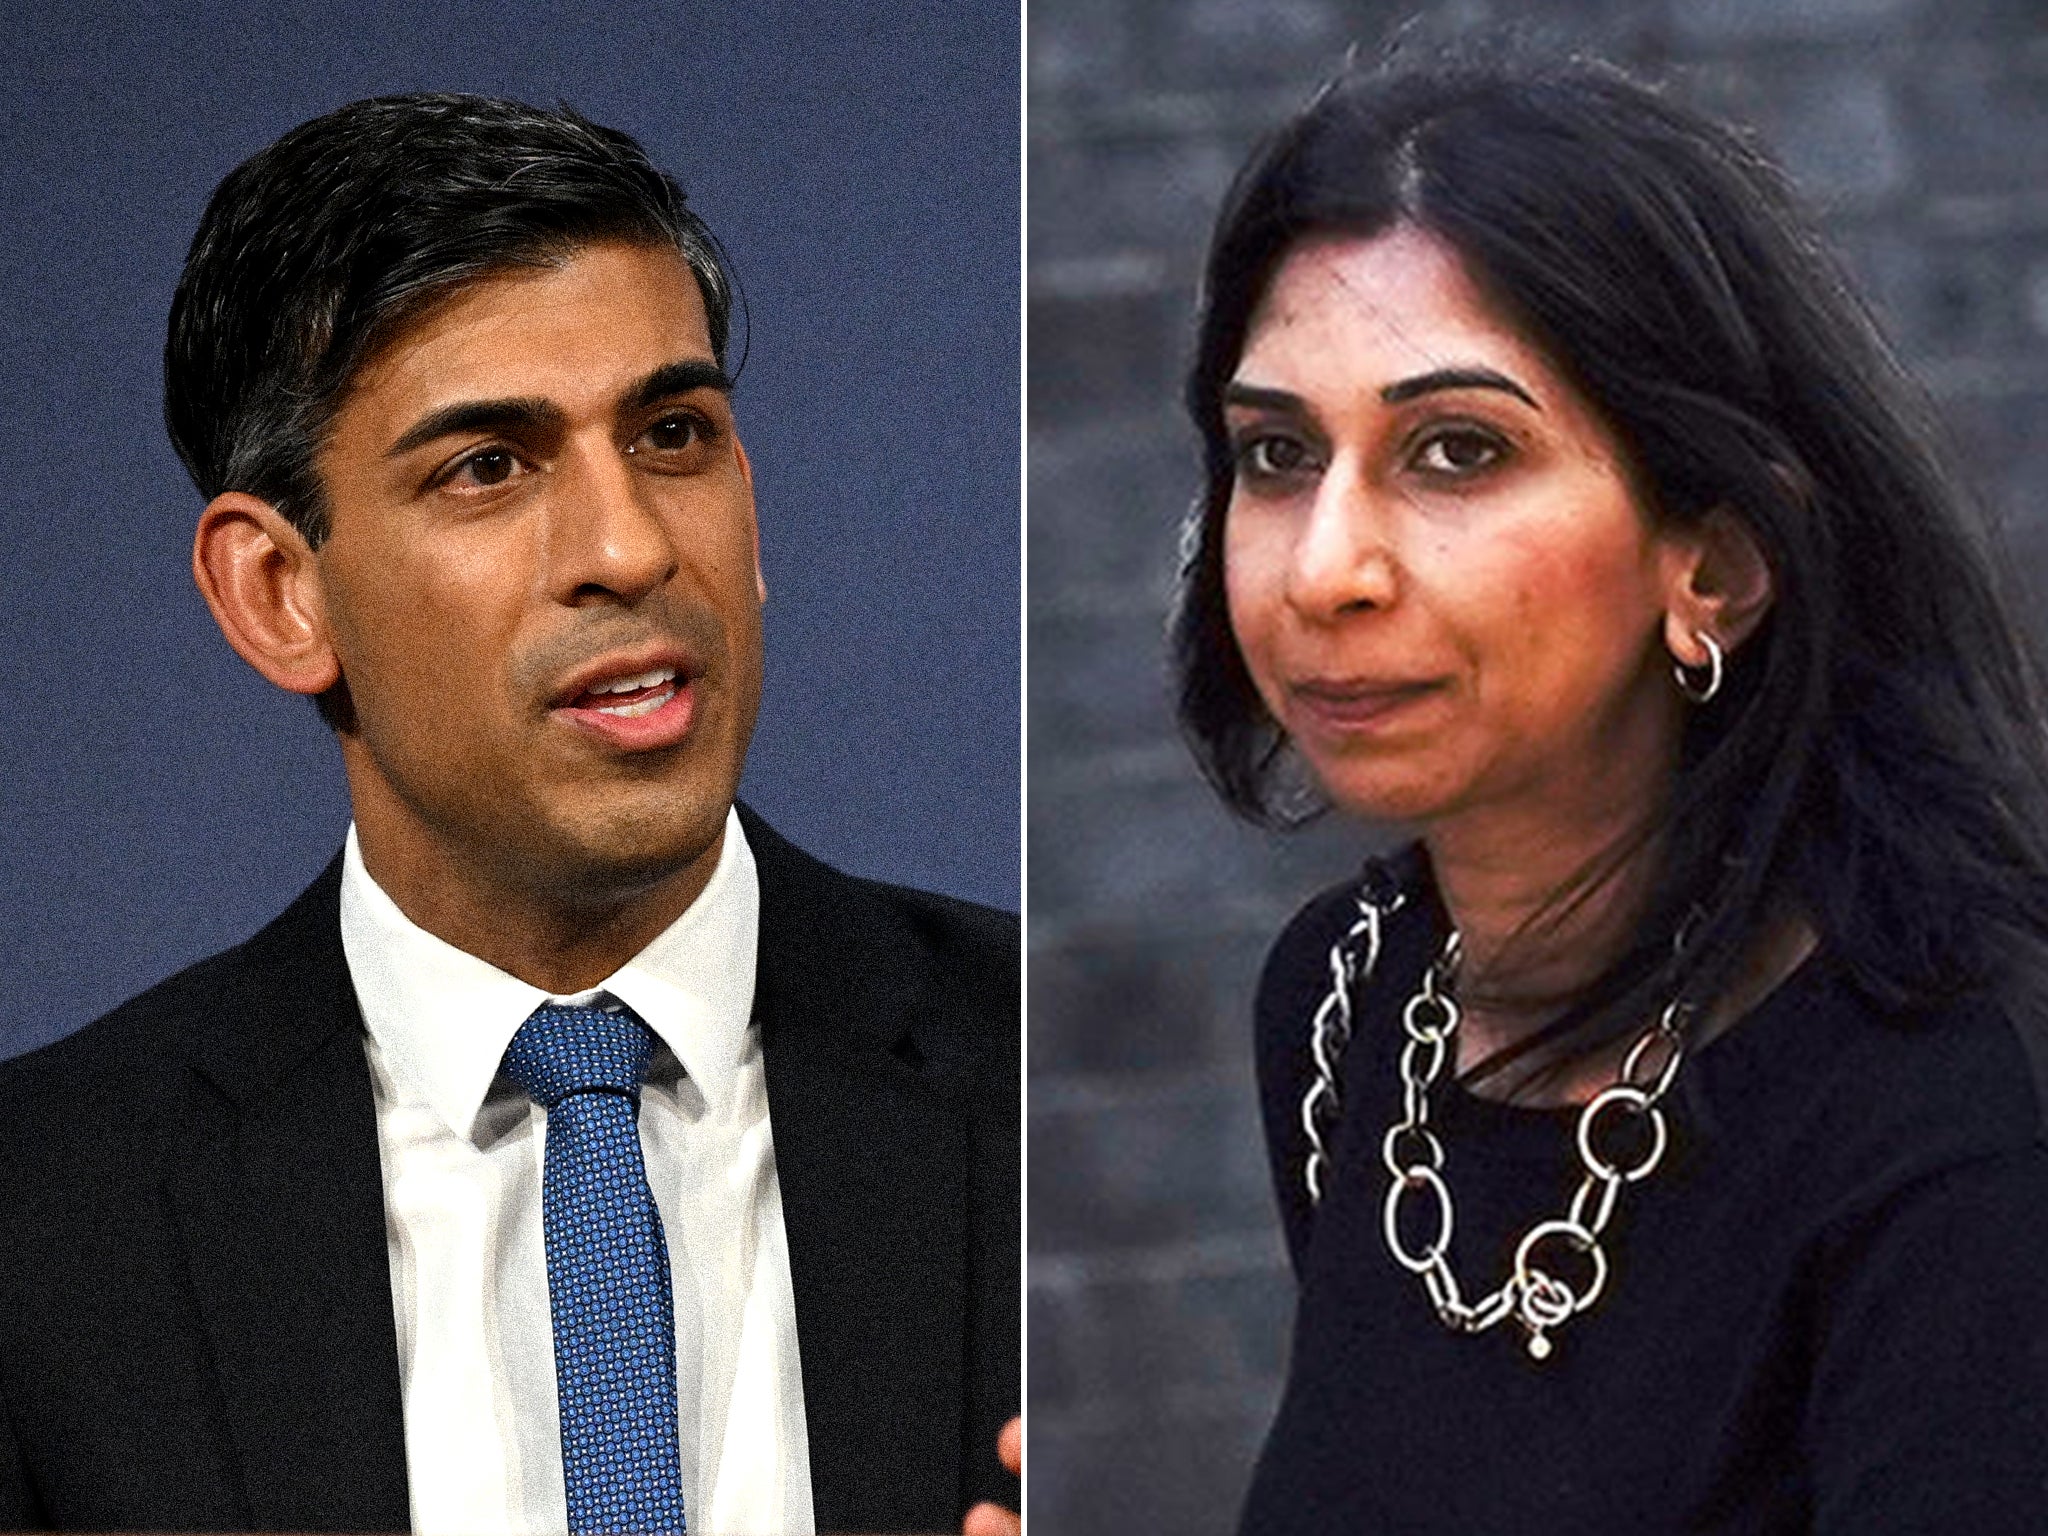 Senior Tories expect Suella Braverman to find a pretext – probably on immigration – to resign